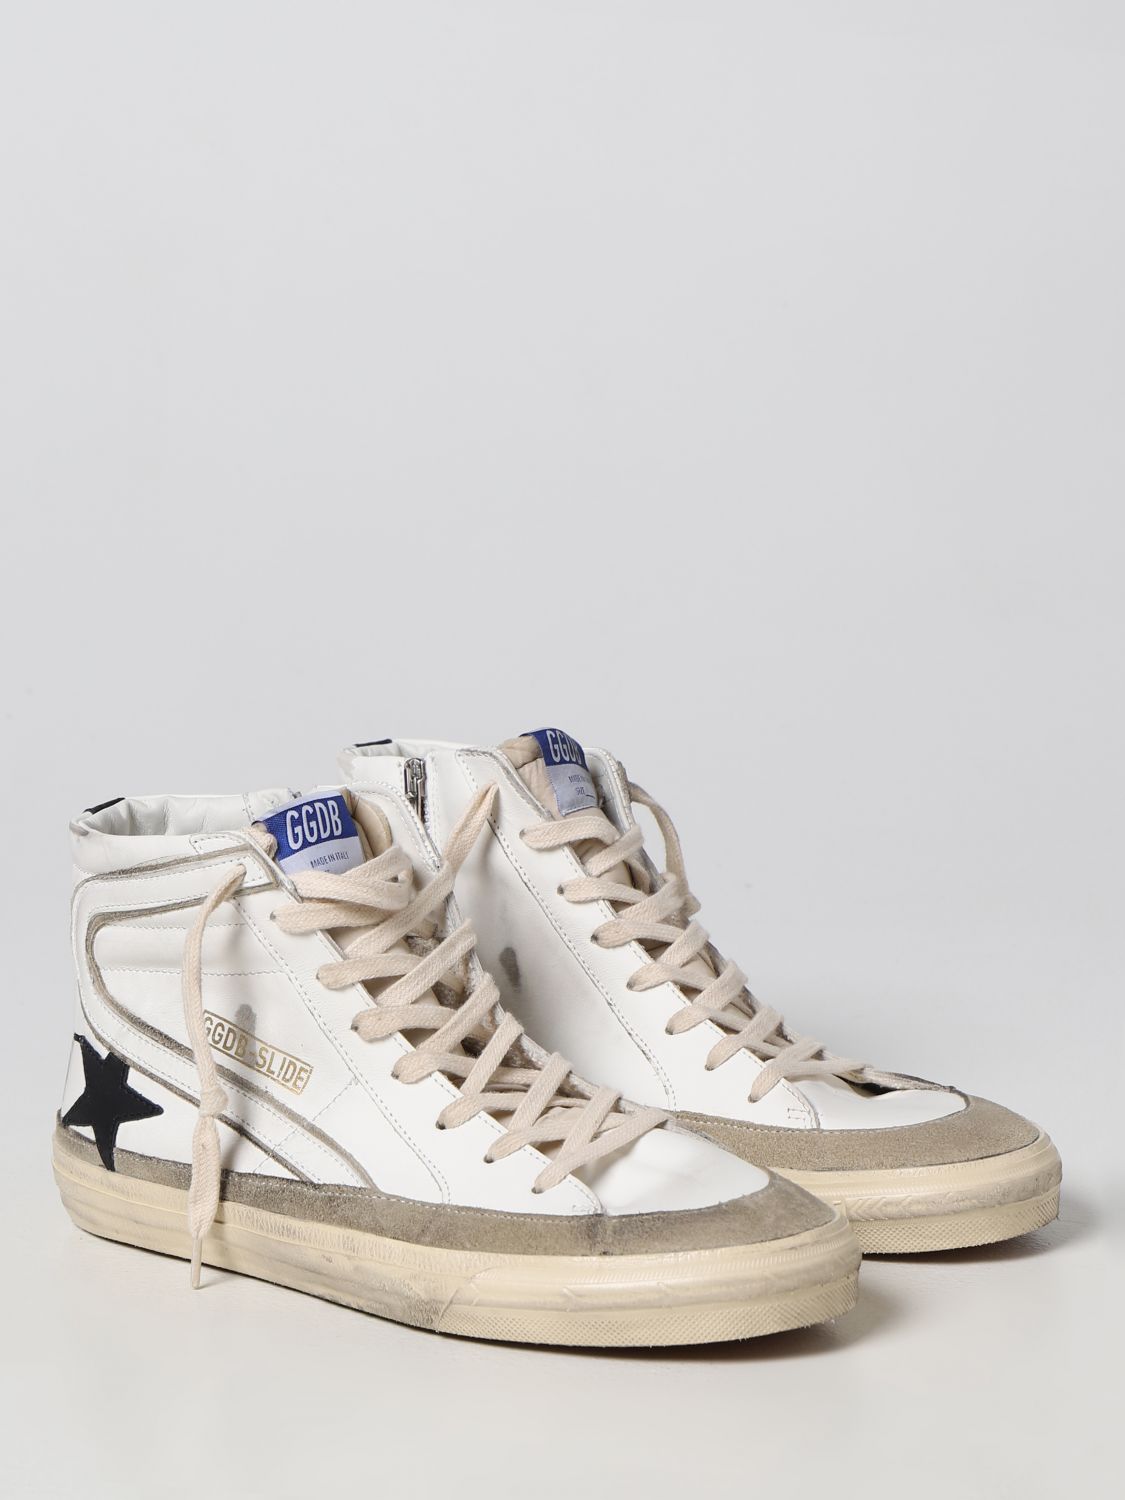 GOLDEN GOOSE: Slide sneakers in leather - | Golden Goose sneakers GMF00369F00325911198 online on GIGLIO.COM